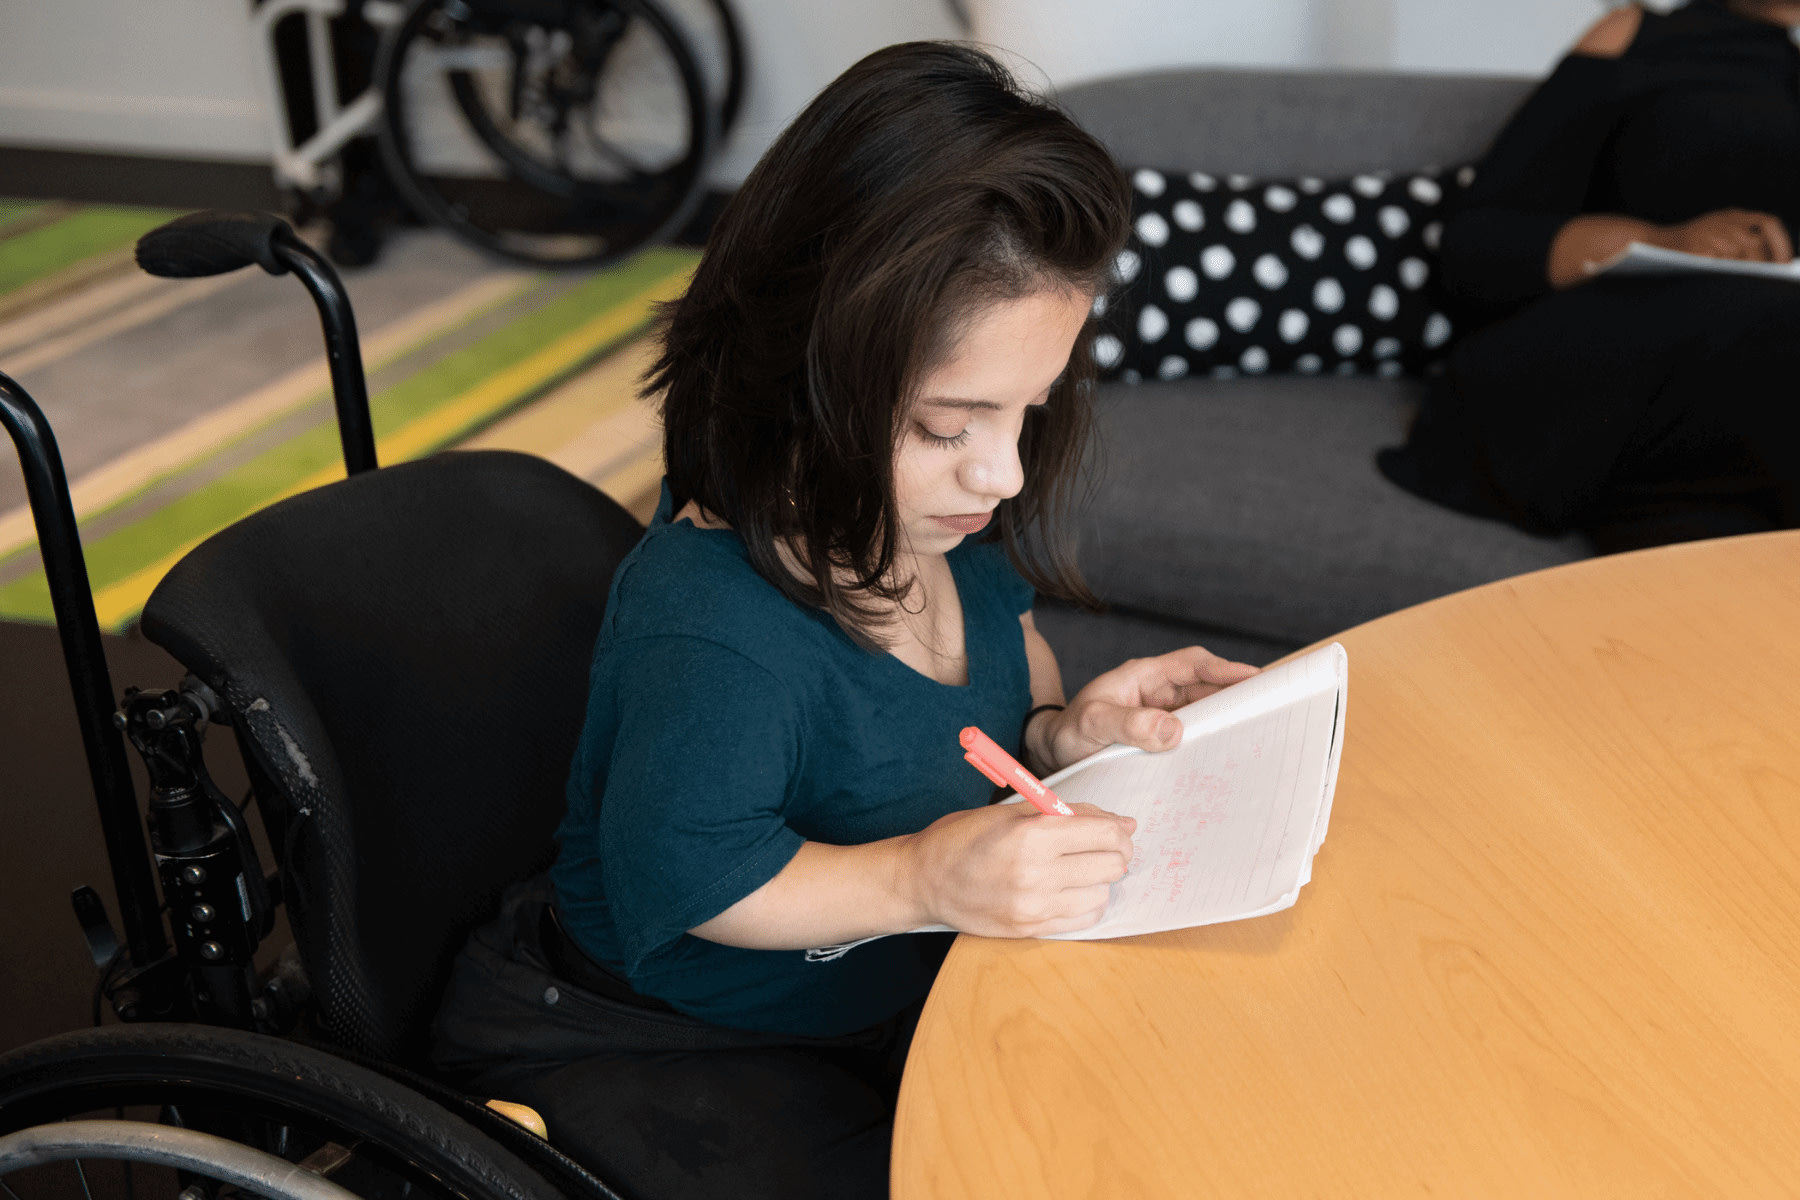 Women writing at a desk. Photograph: Disabled and Here